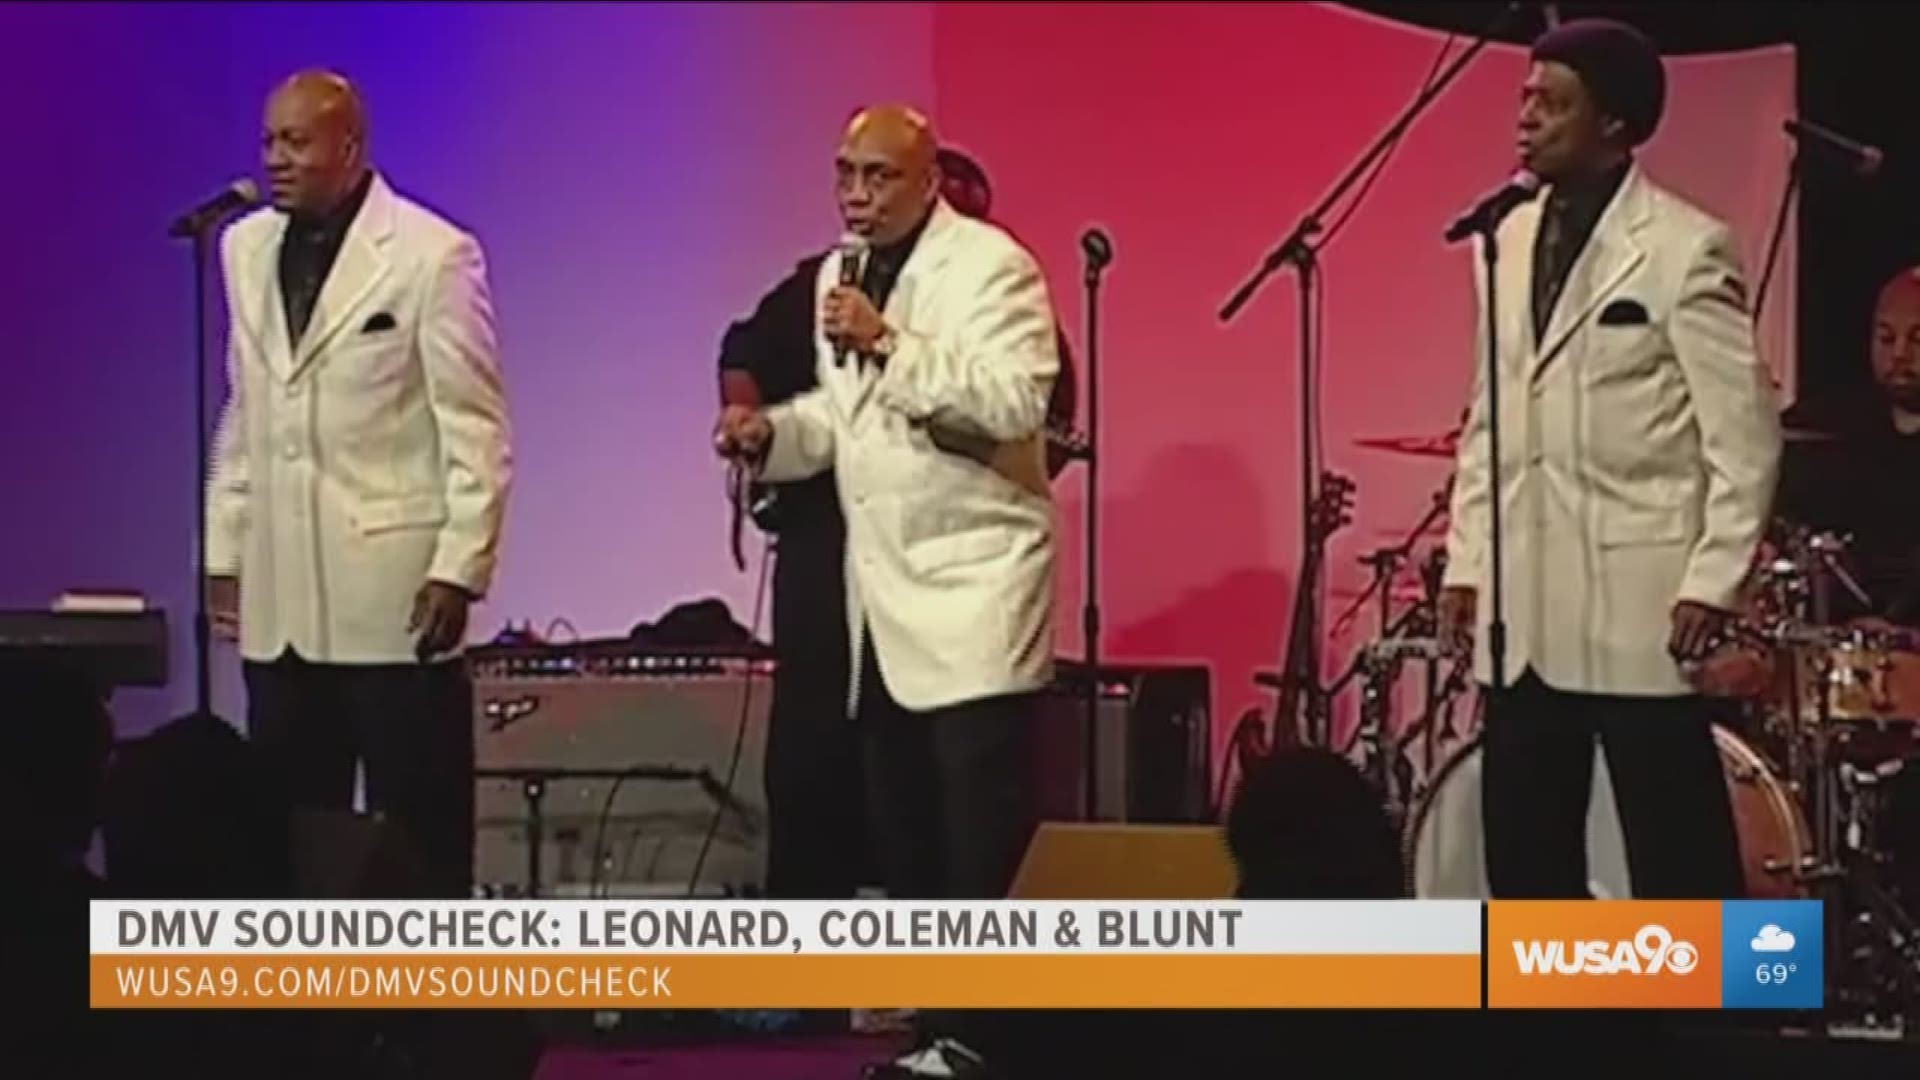 Joe Coleman of "The Platters" and Joe Blunt of "The Drifters" tell us about their upcoming show which also features Glen Leonard of "The Temptations".